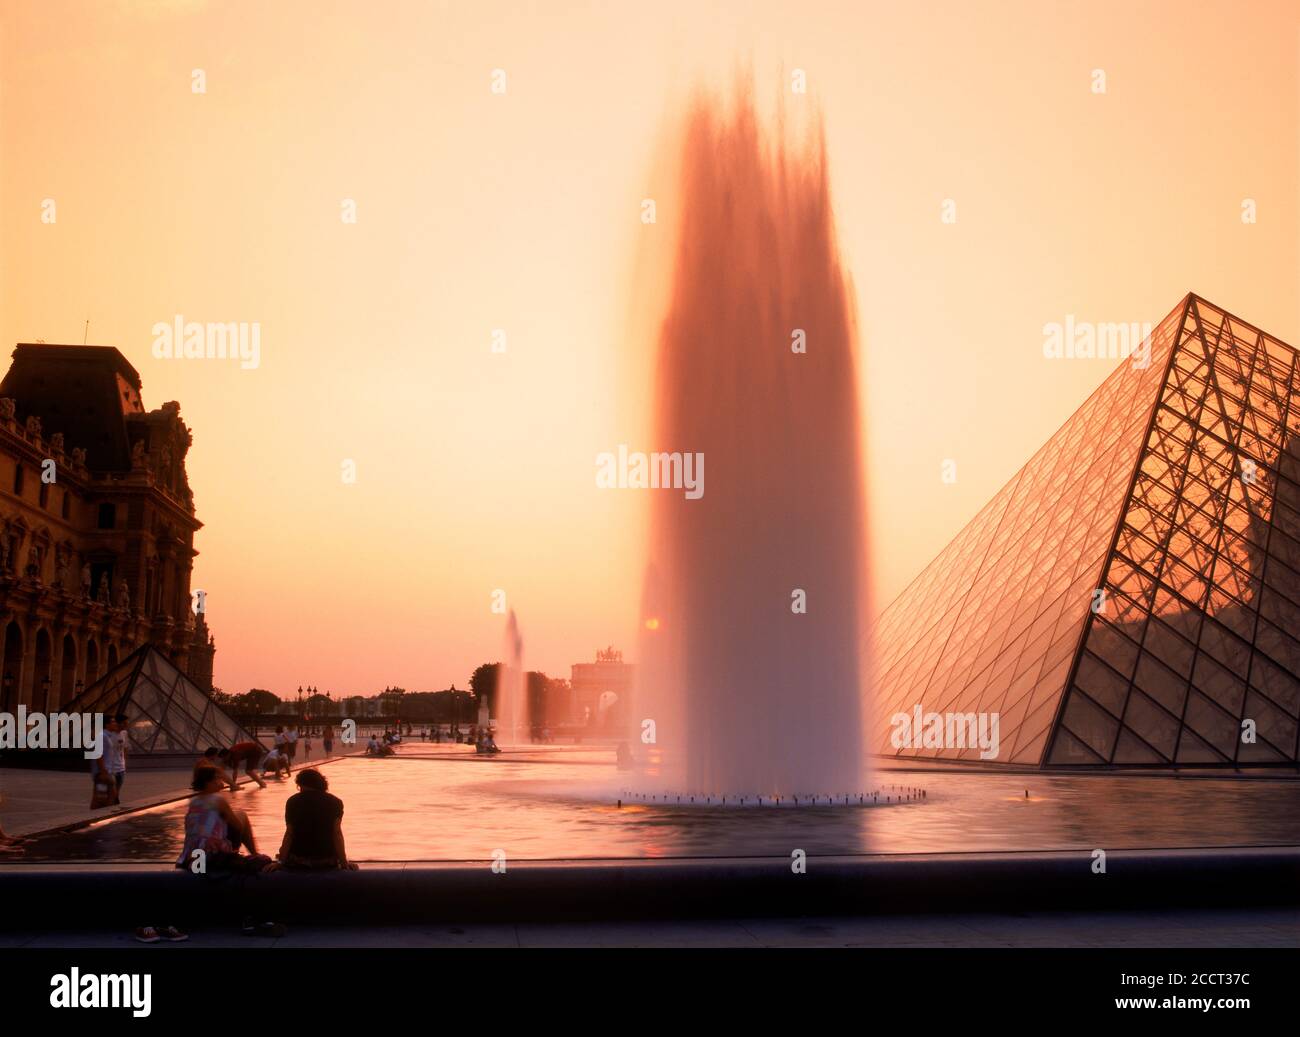 People sitting at the fountain at Louvre Palace Museum in Paris silhouetted in sunset light Stock Photo